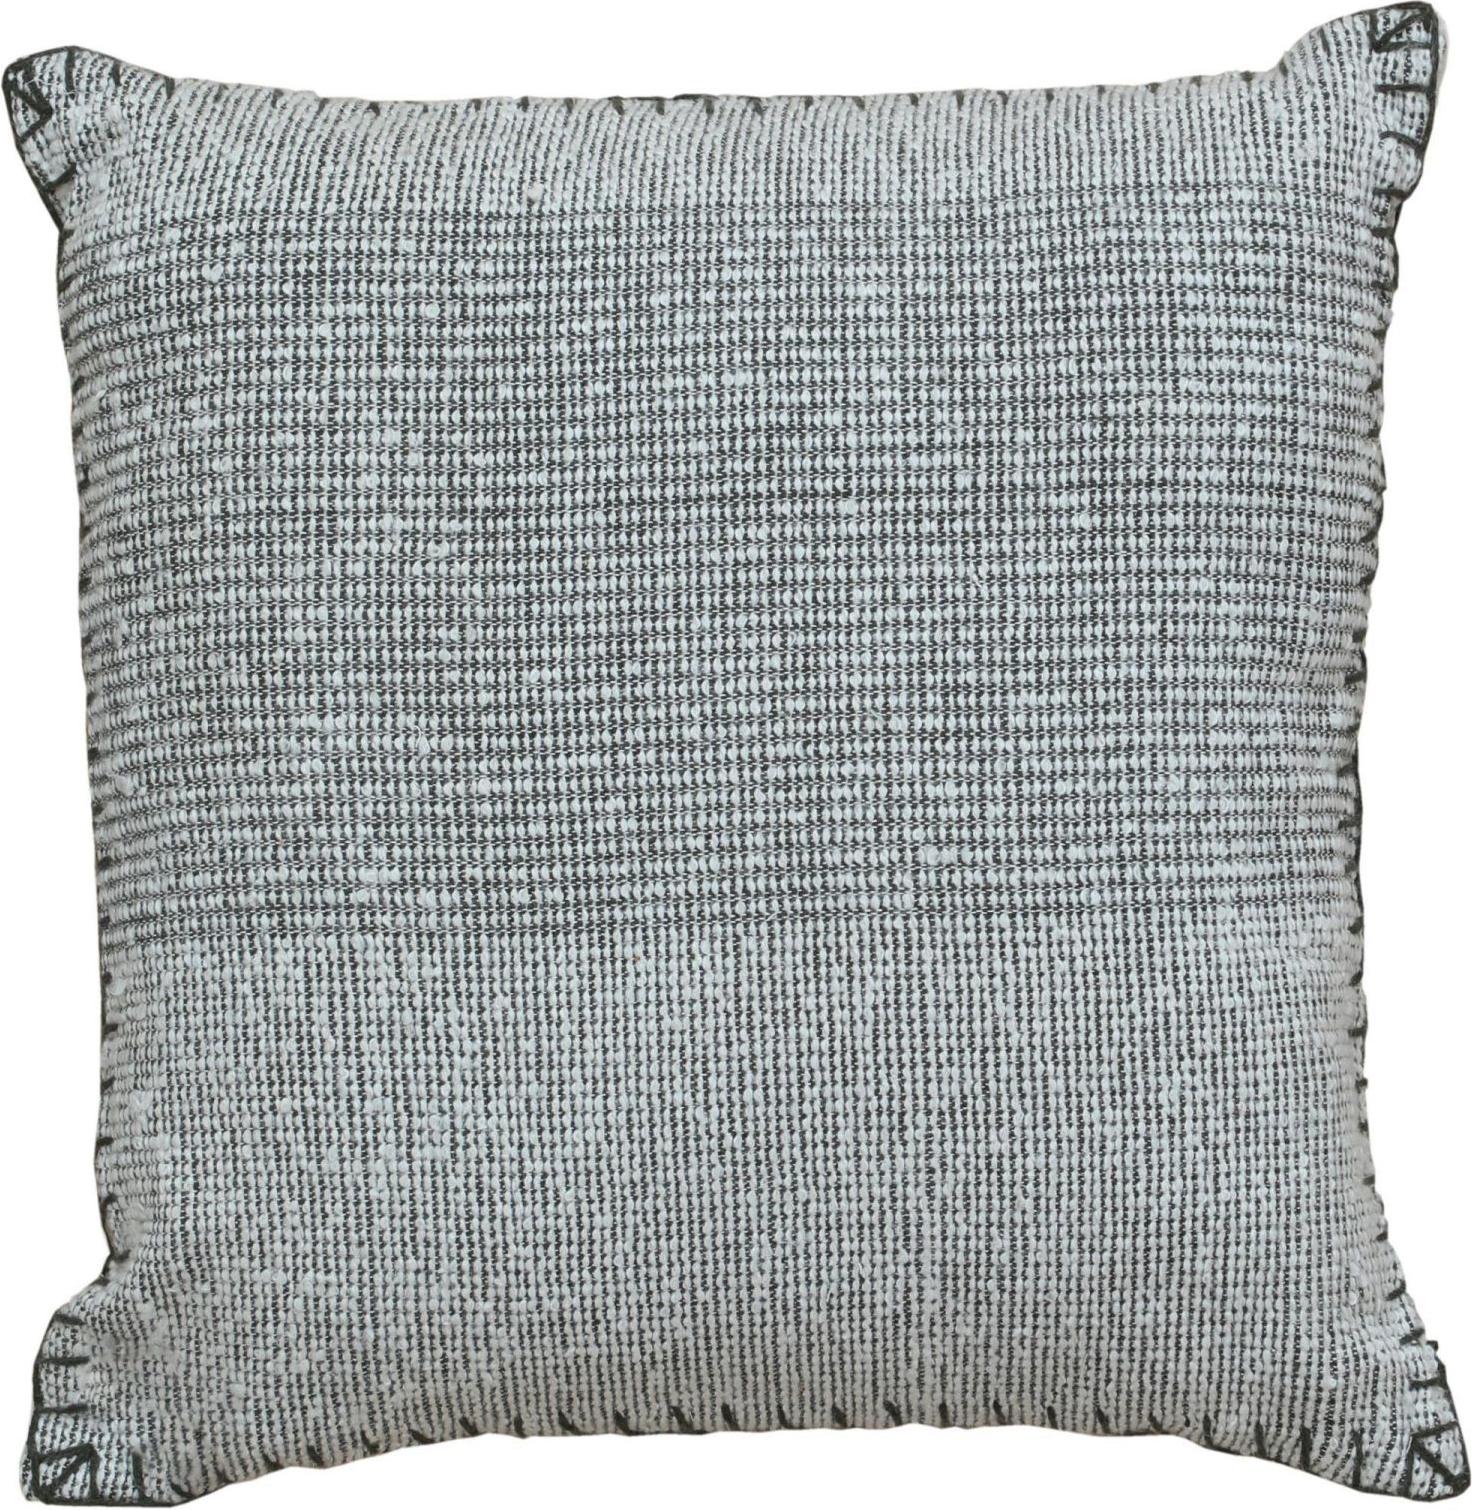 Hand-Knotted Contemporary Boho Chic Wool and Cotton Pillow In Gray For Sale